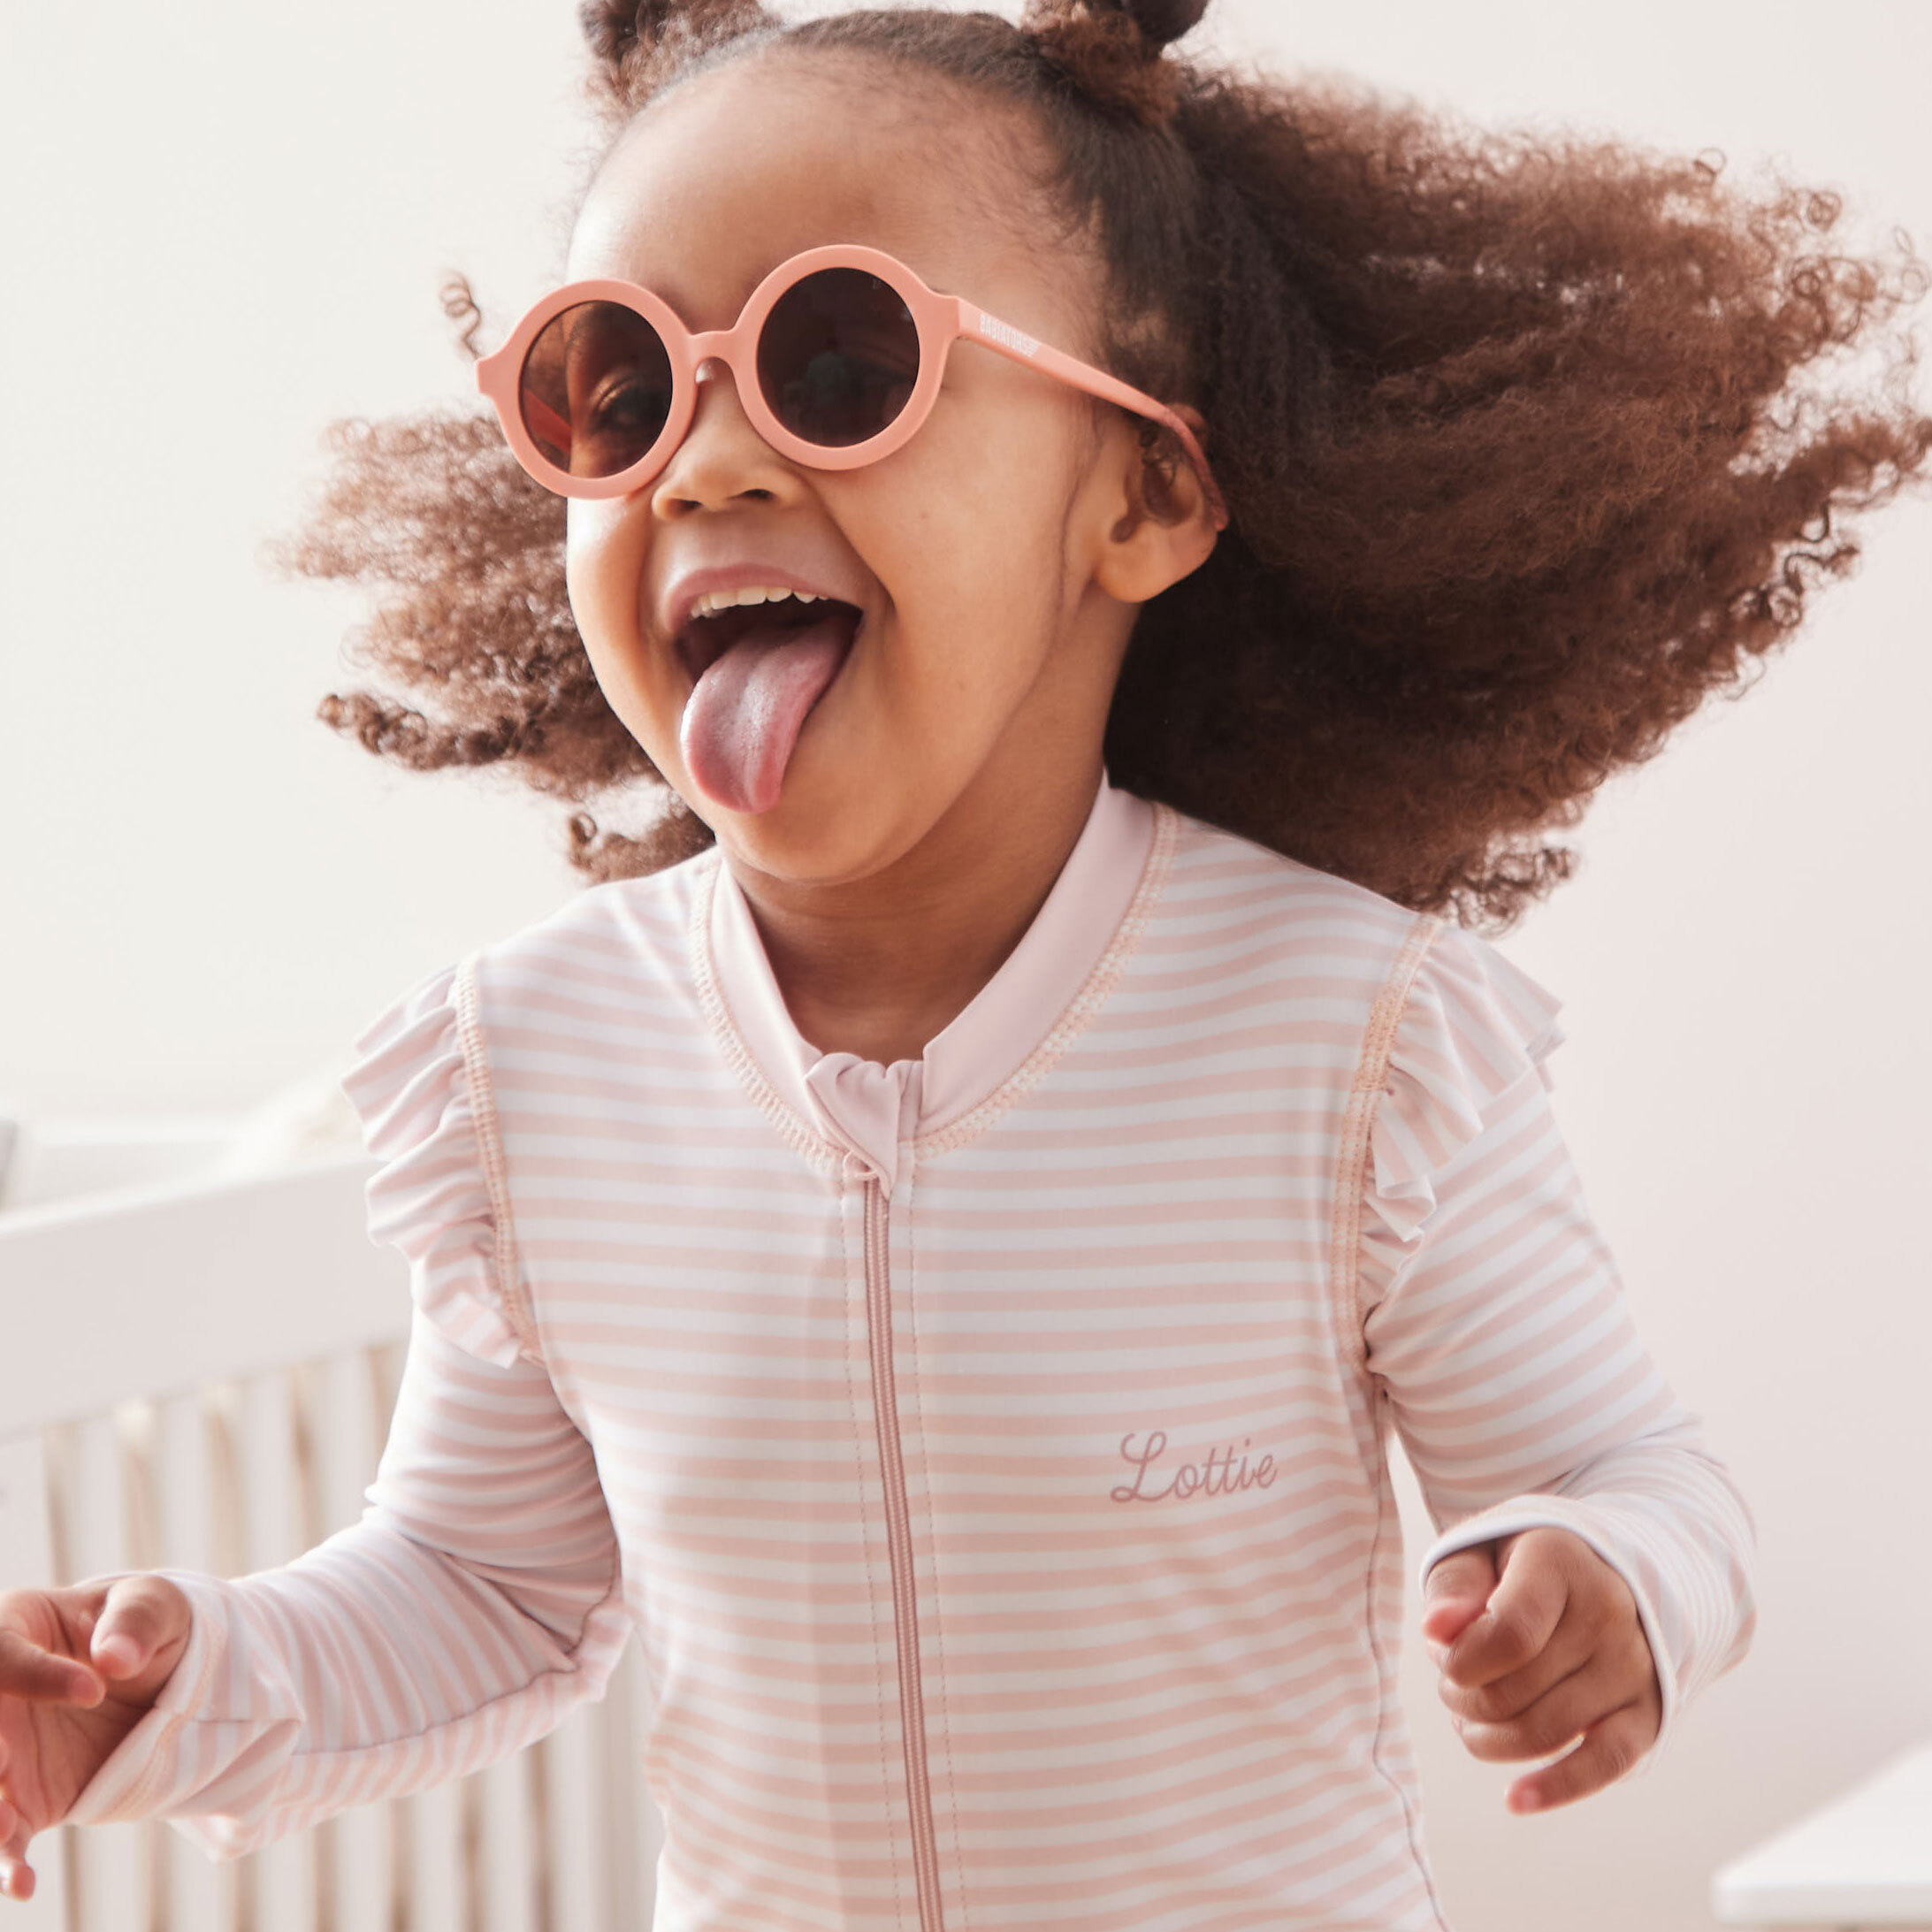 Welcoming Spring: Explore Our Latest Spring Selections for Little Ones